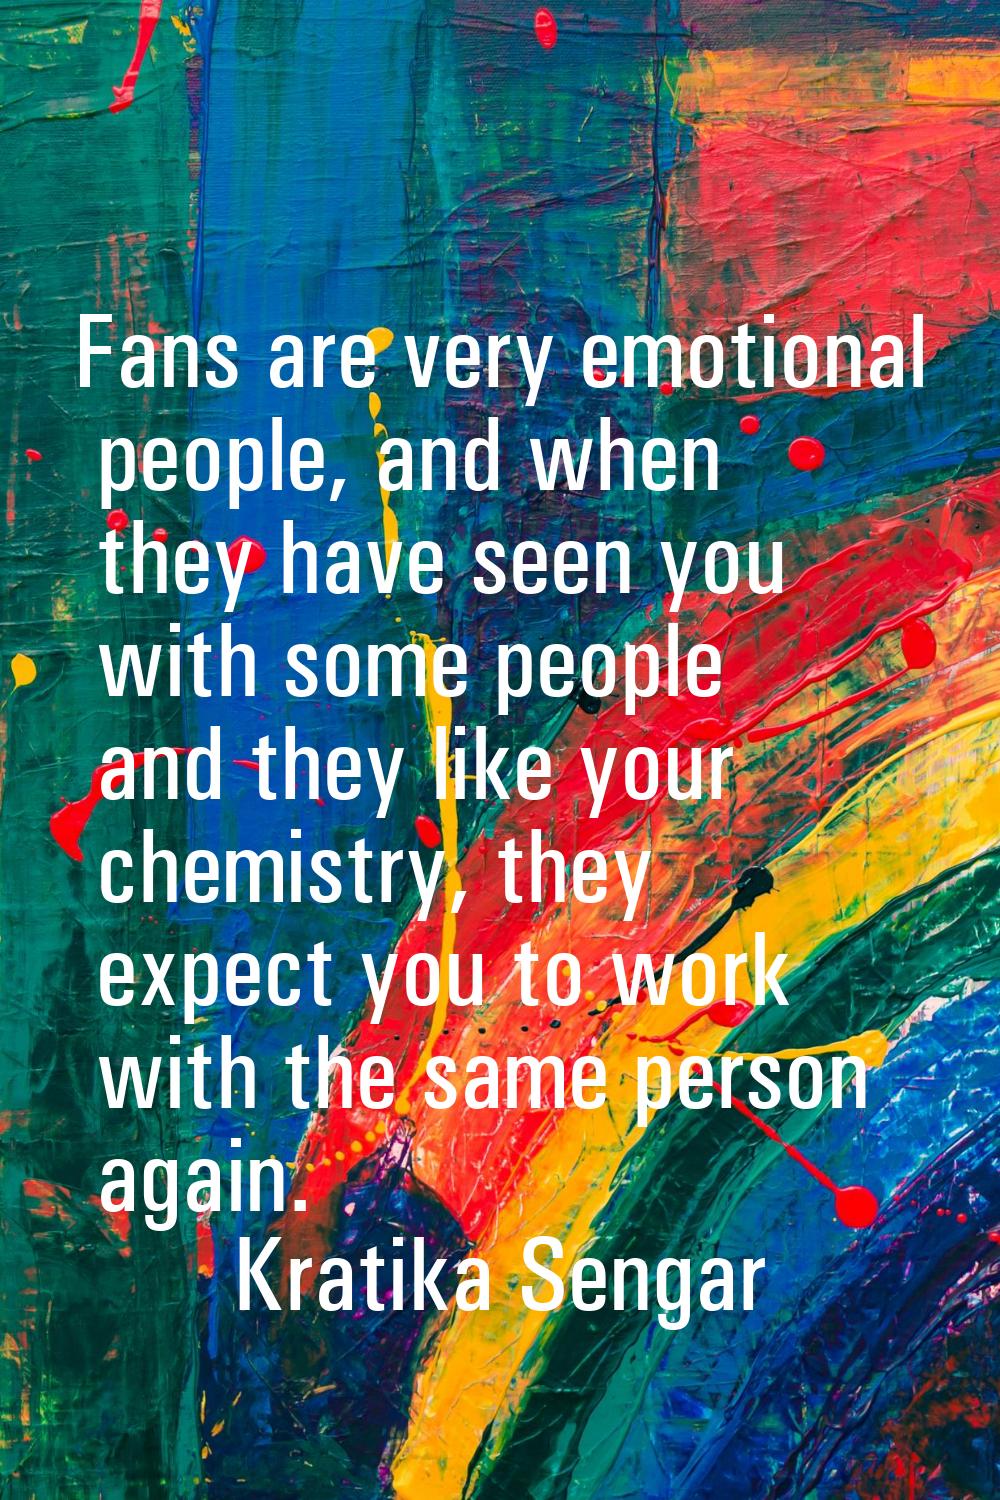 Fans are very emotional people, and when they have seen you with some people and they like your che